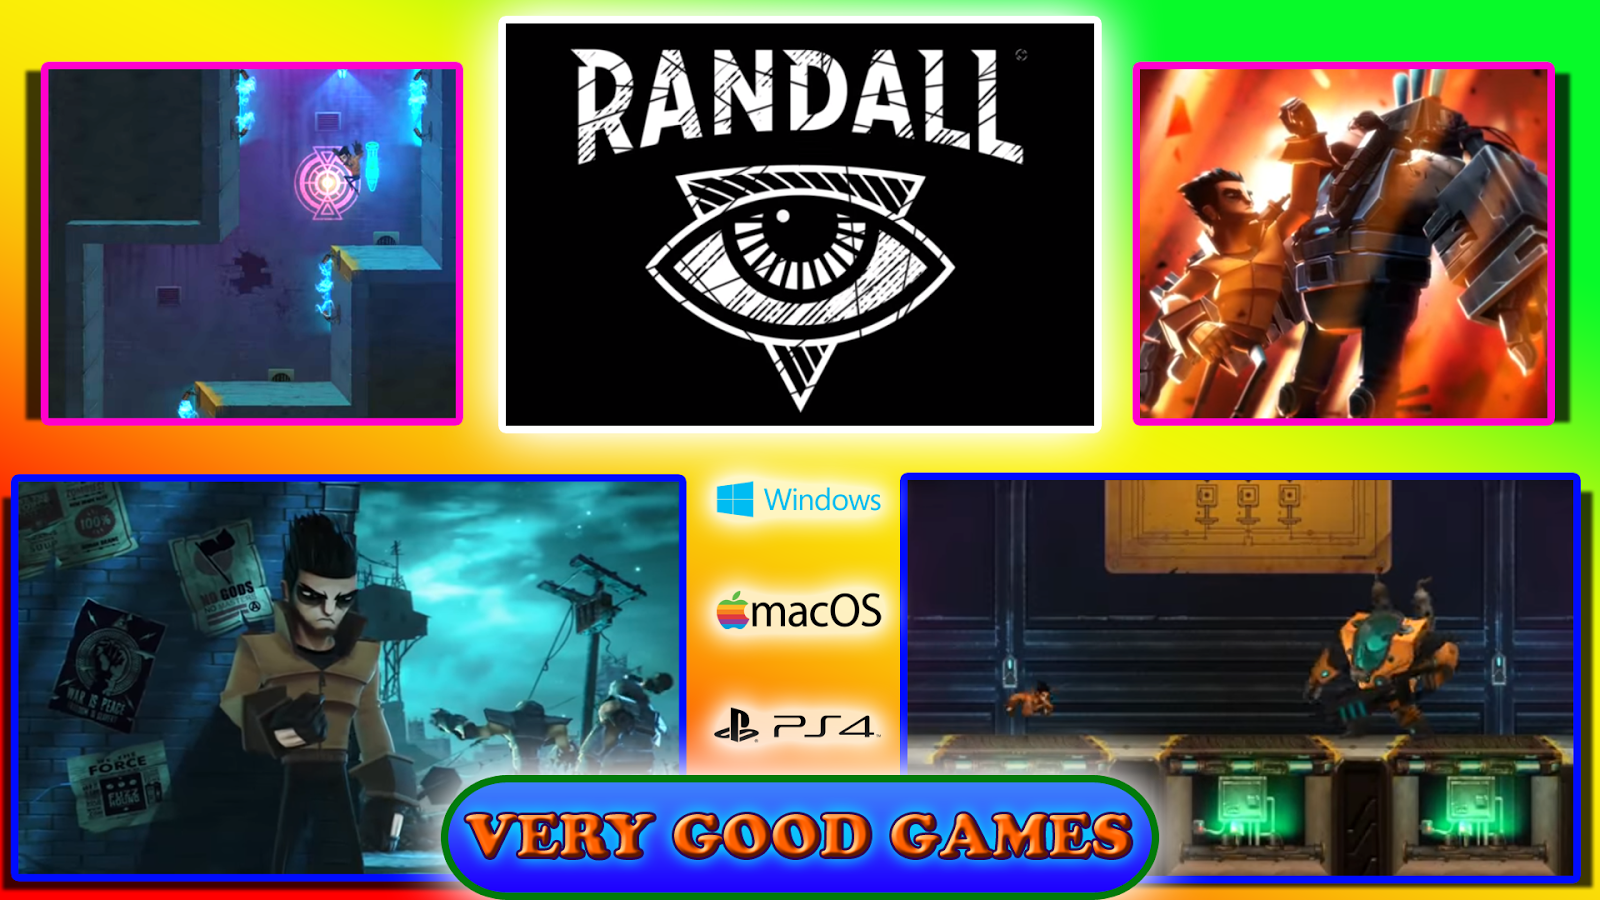 Abanner with screenshot of the Randall game for PS4 game consoles, PC, and Mac computers